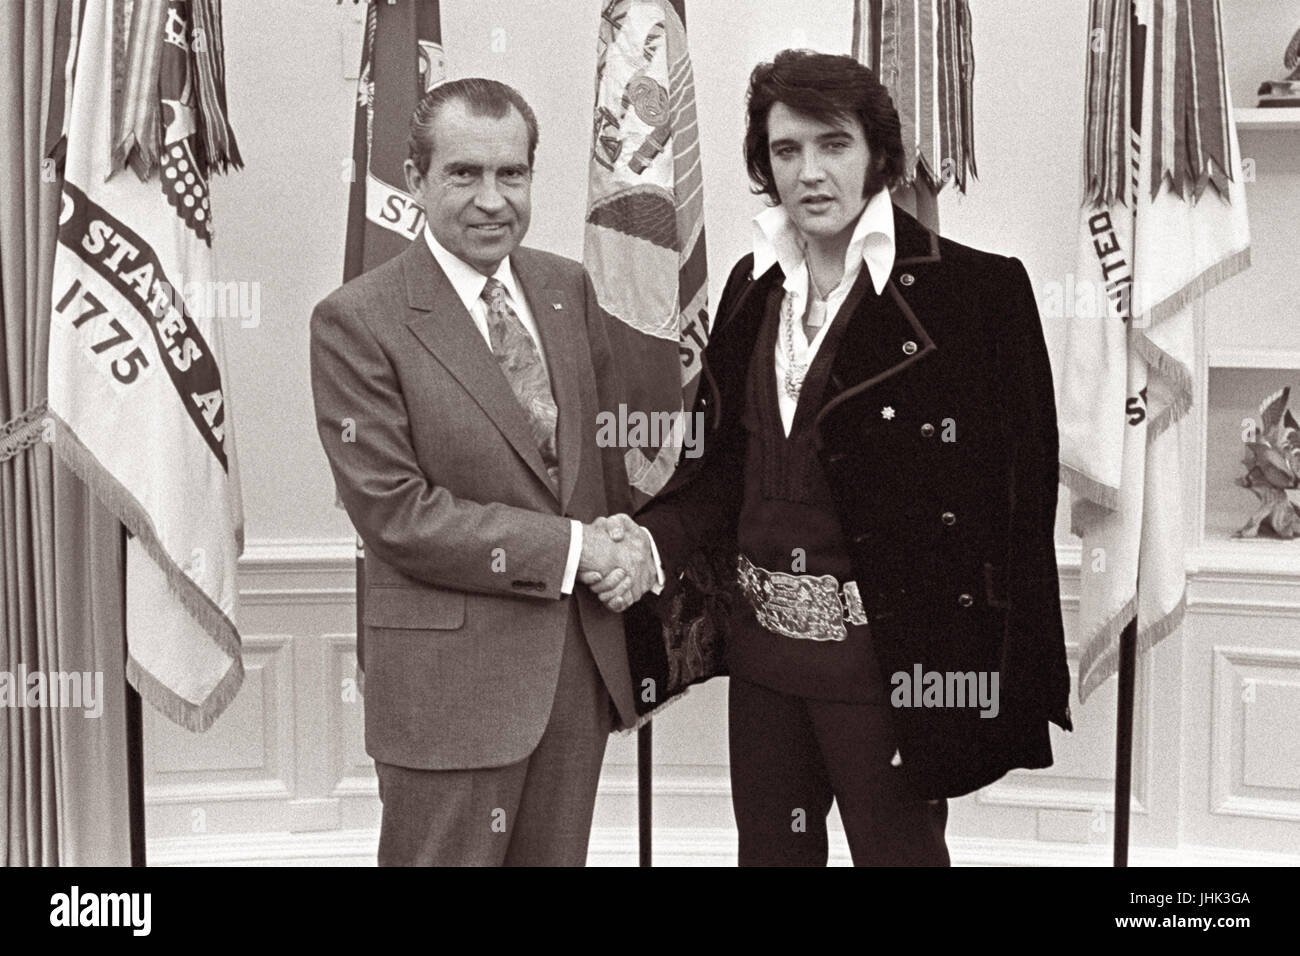 President Nixon shaking hands with entertainer Elvis Presley in the Oval Office of the White House on December 21, 1970. (Photo by Oliver F. Atkins) Stock Photo